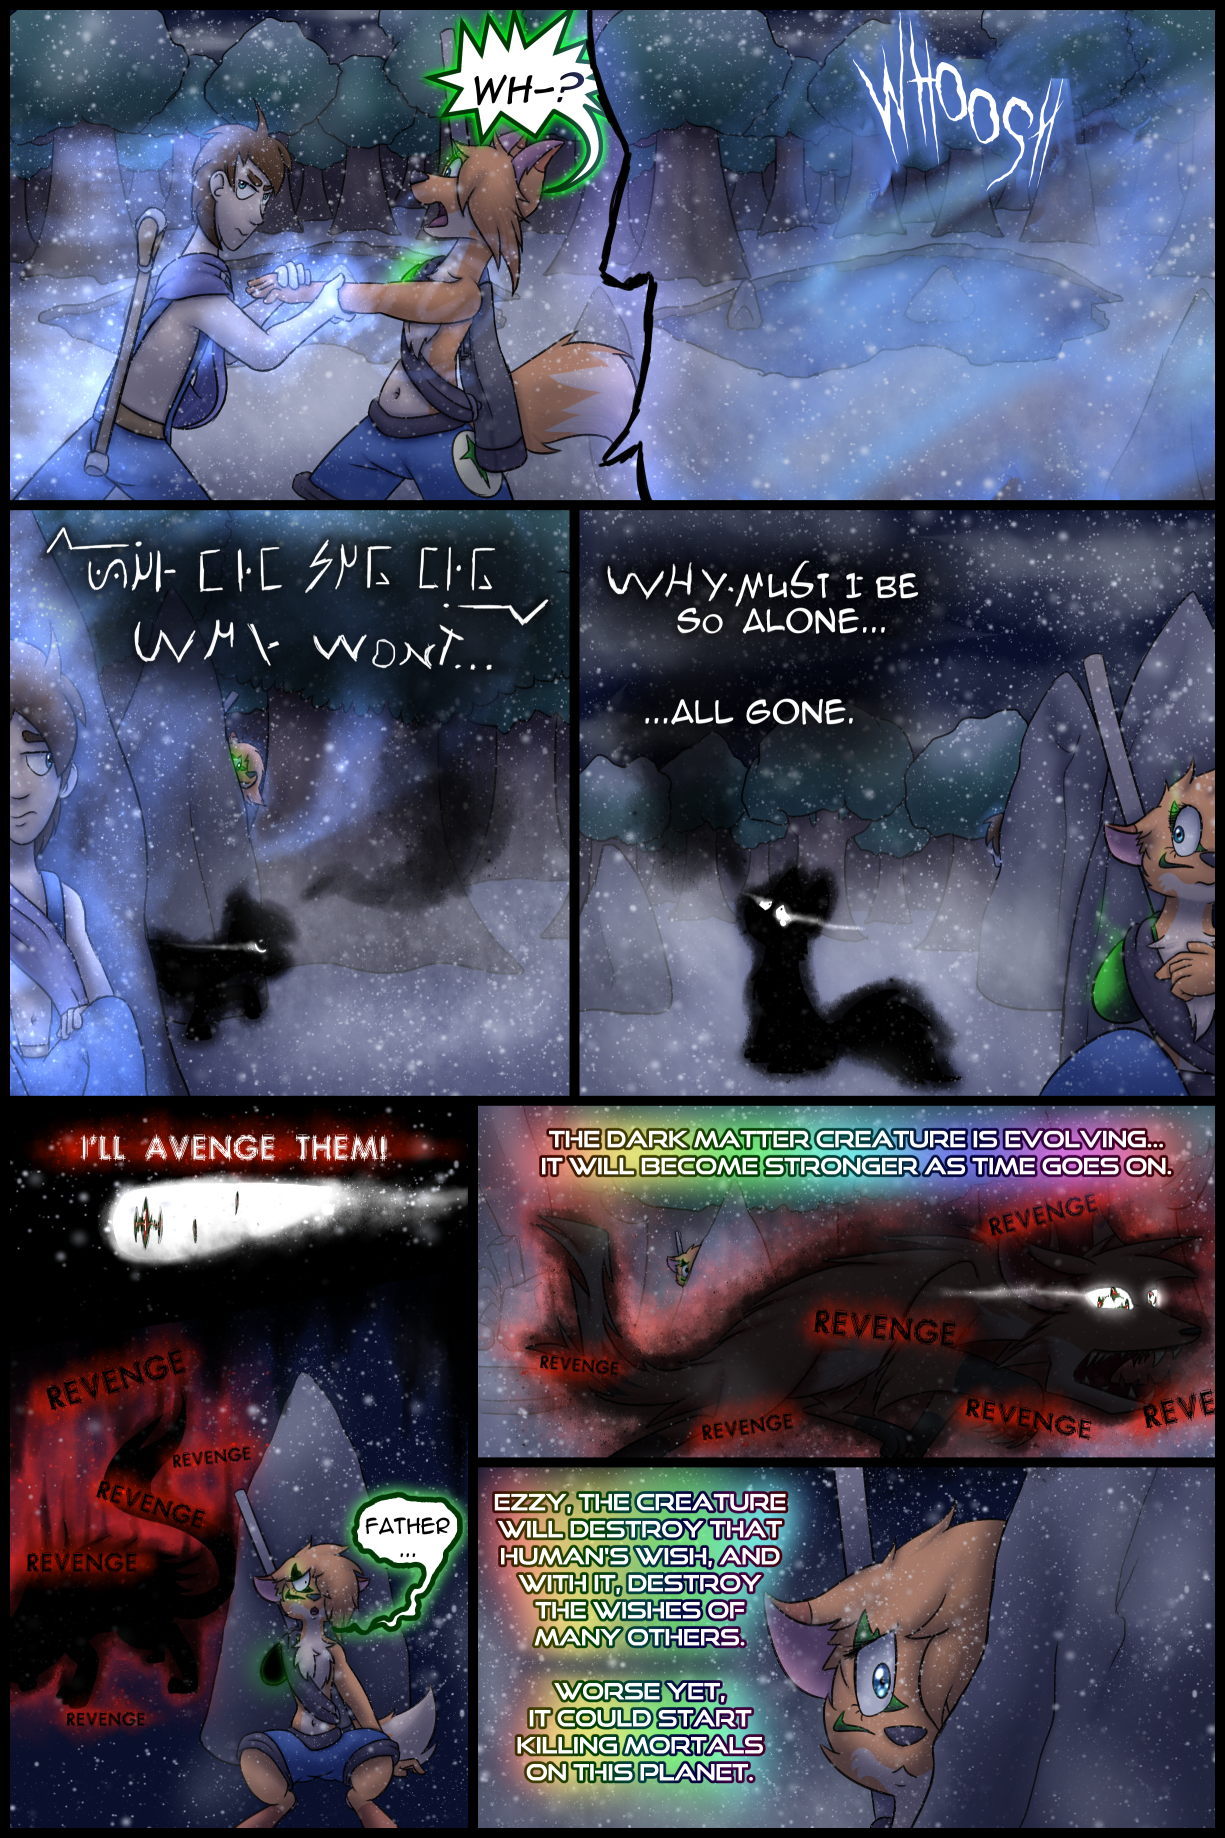 Ch3 Page 17 – Evolved from Hate